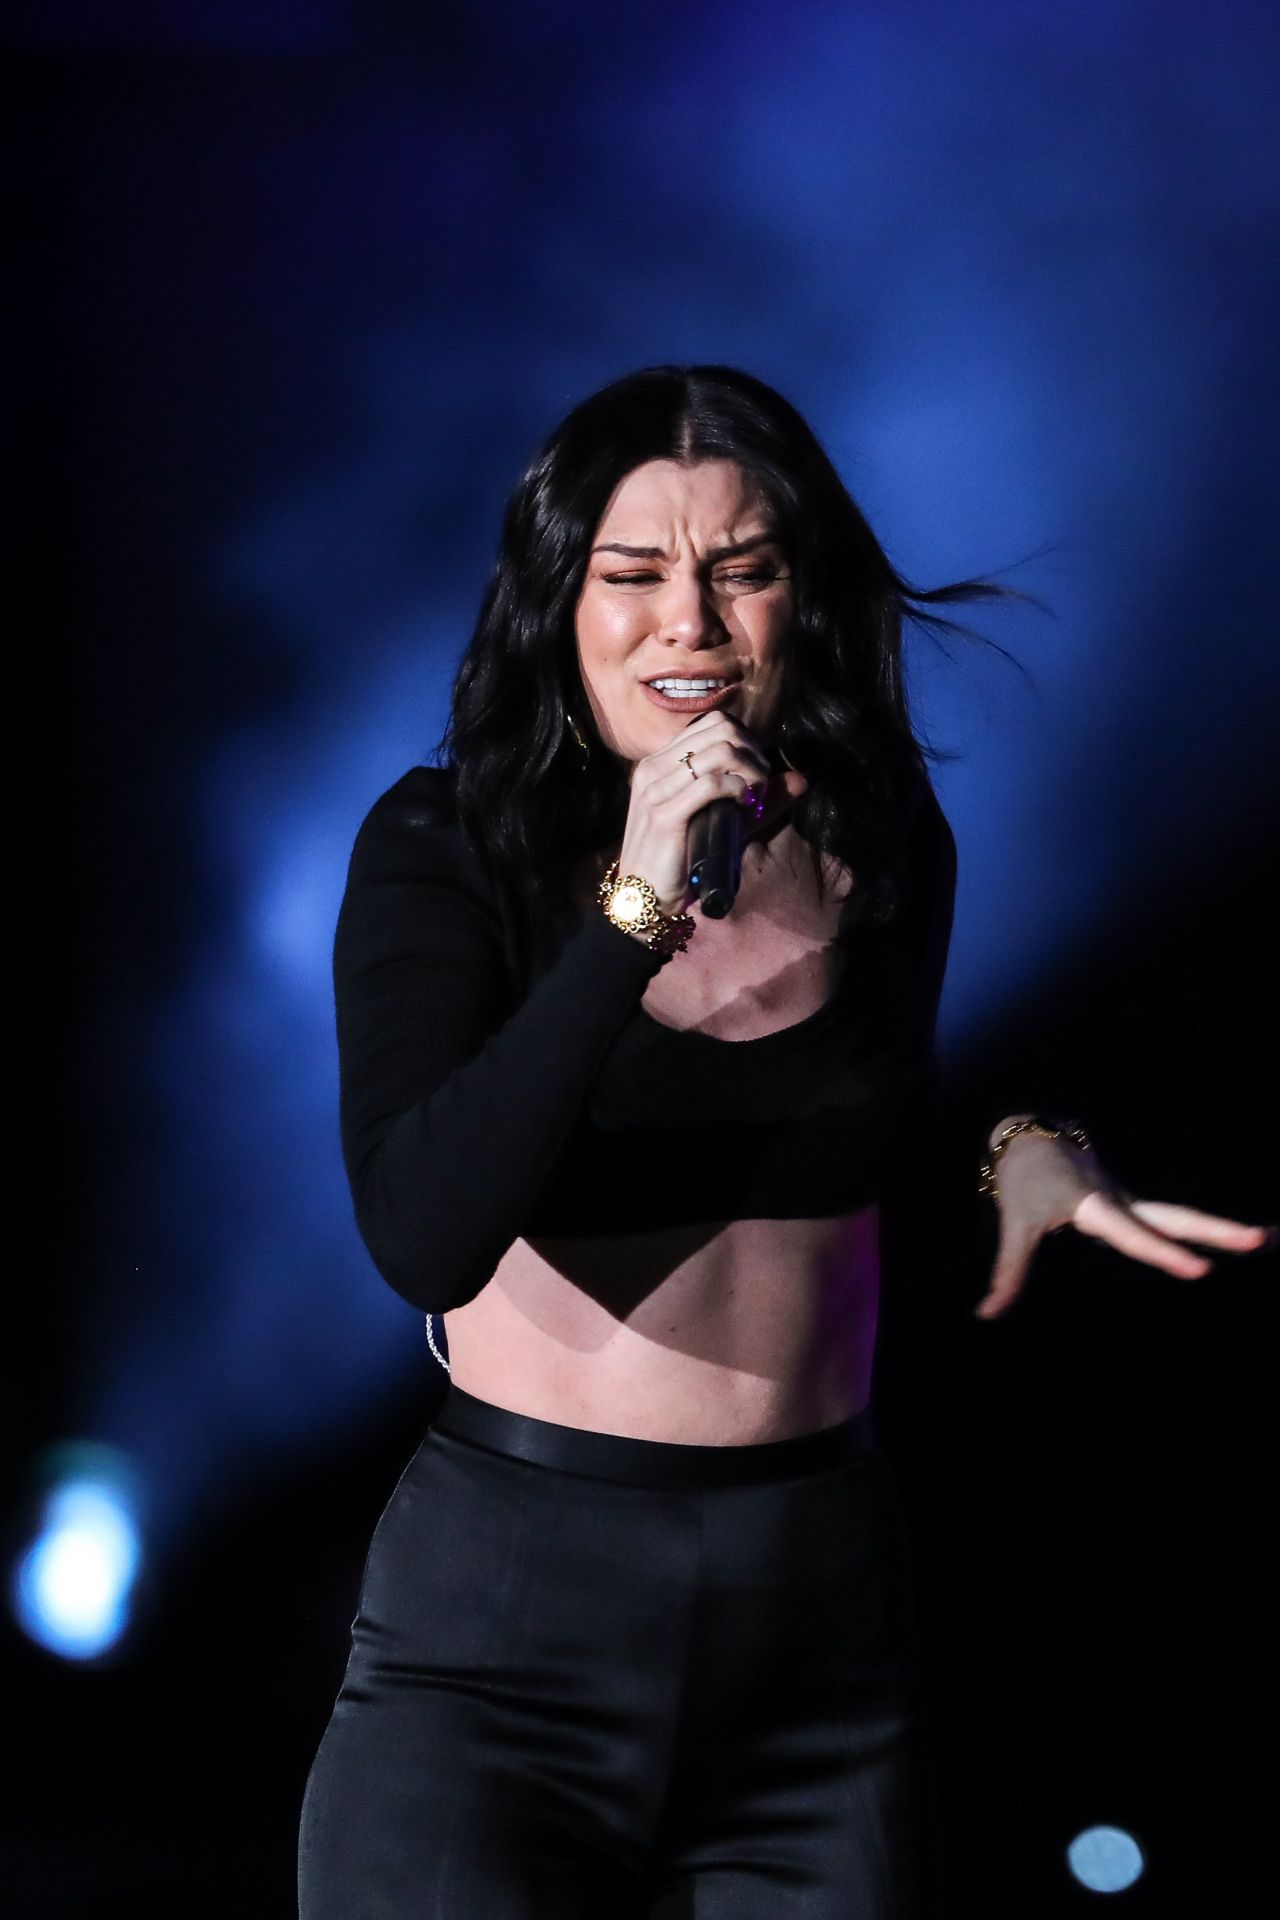 Jessie J We Day Show At Wembley Arena In London 3 22 2017